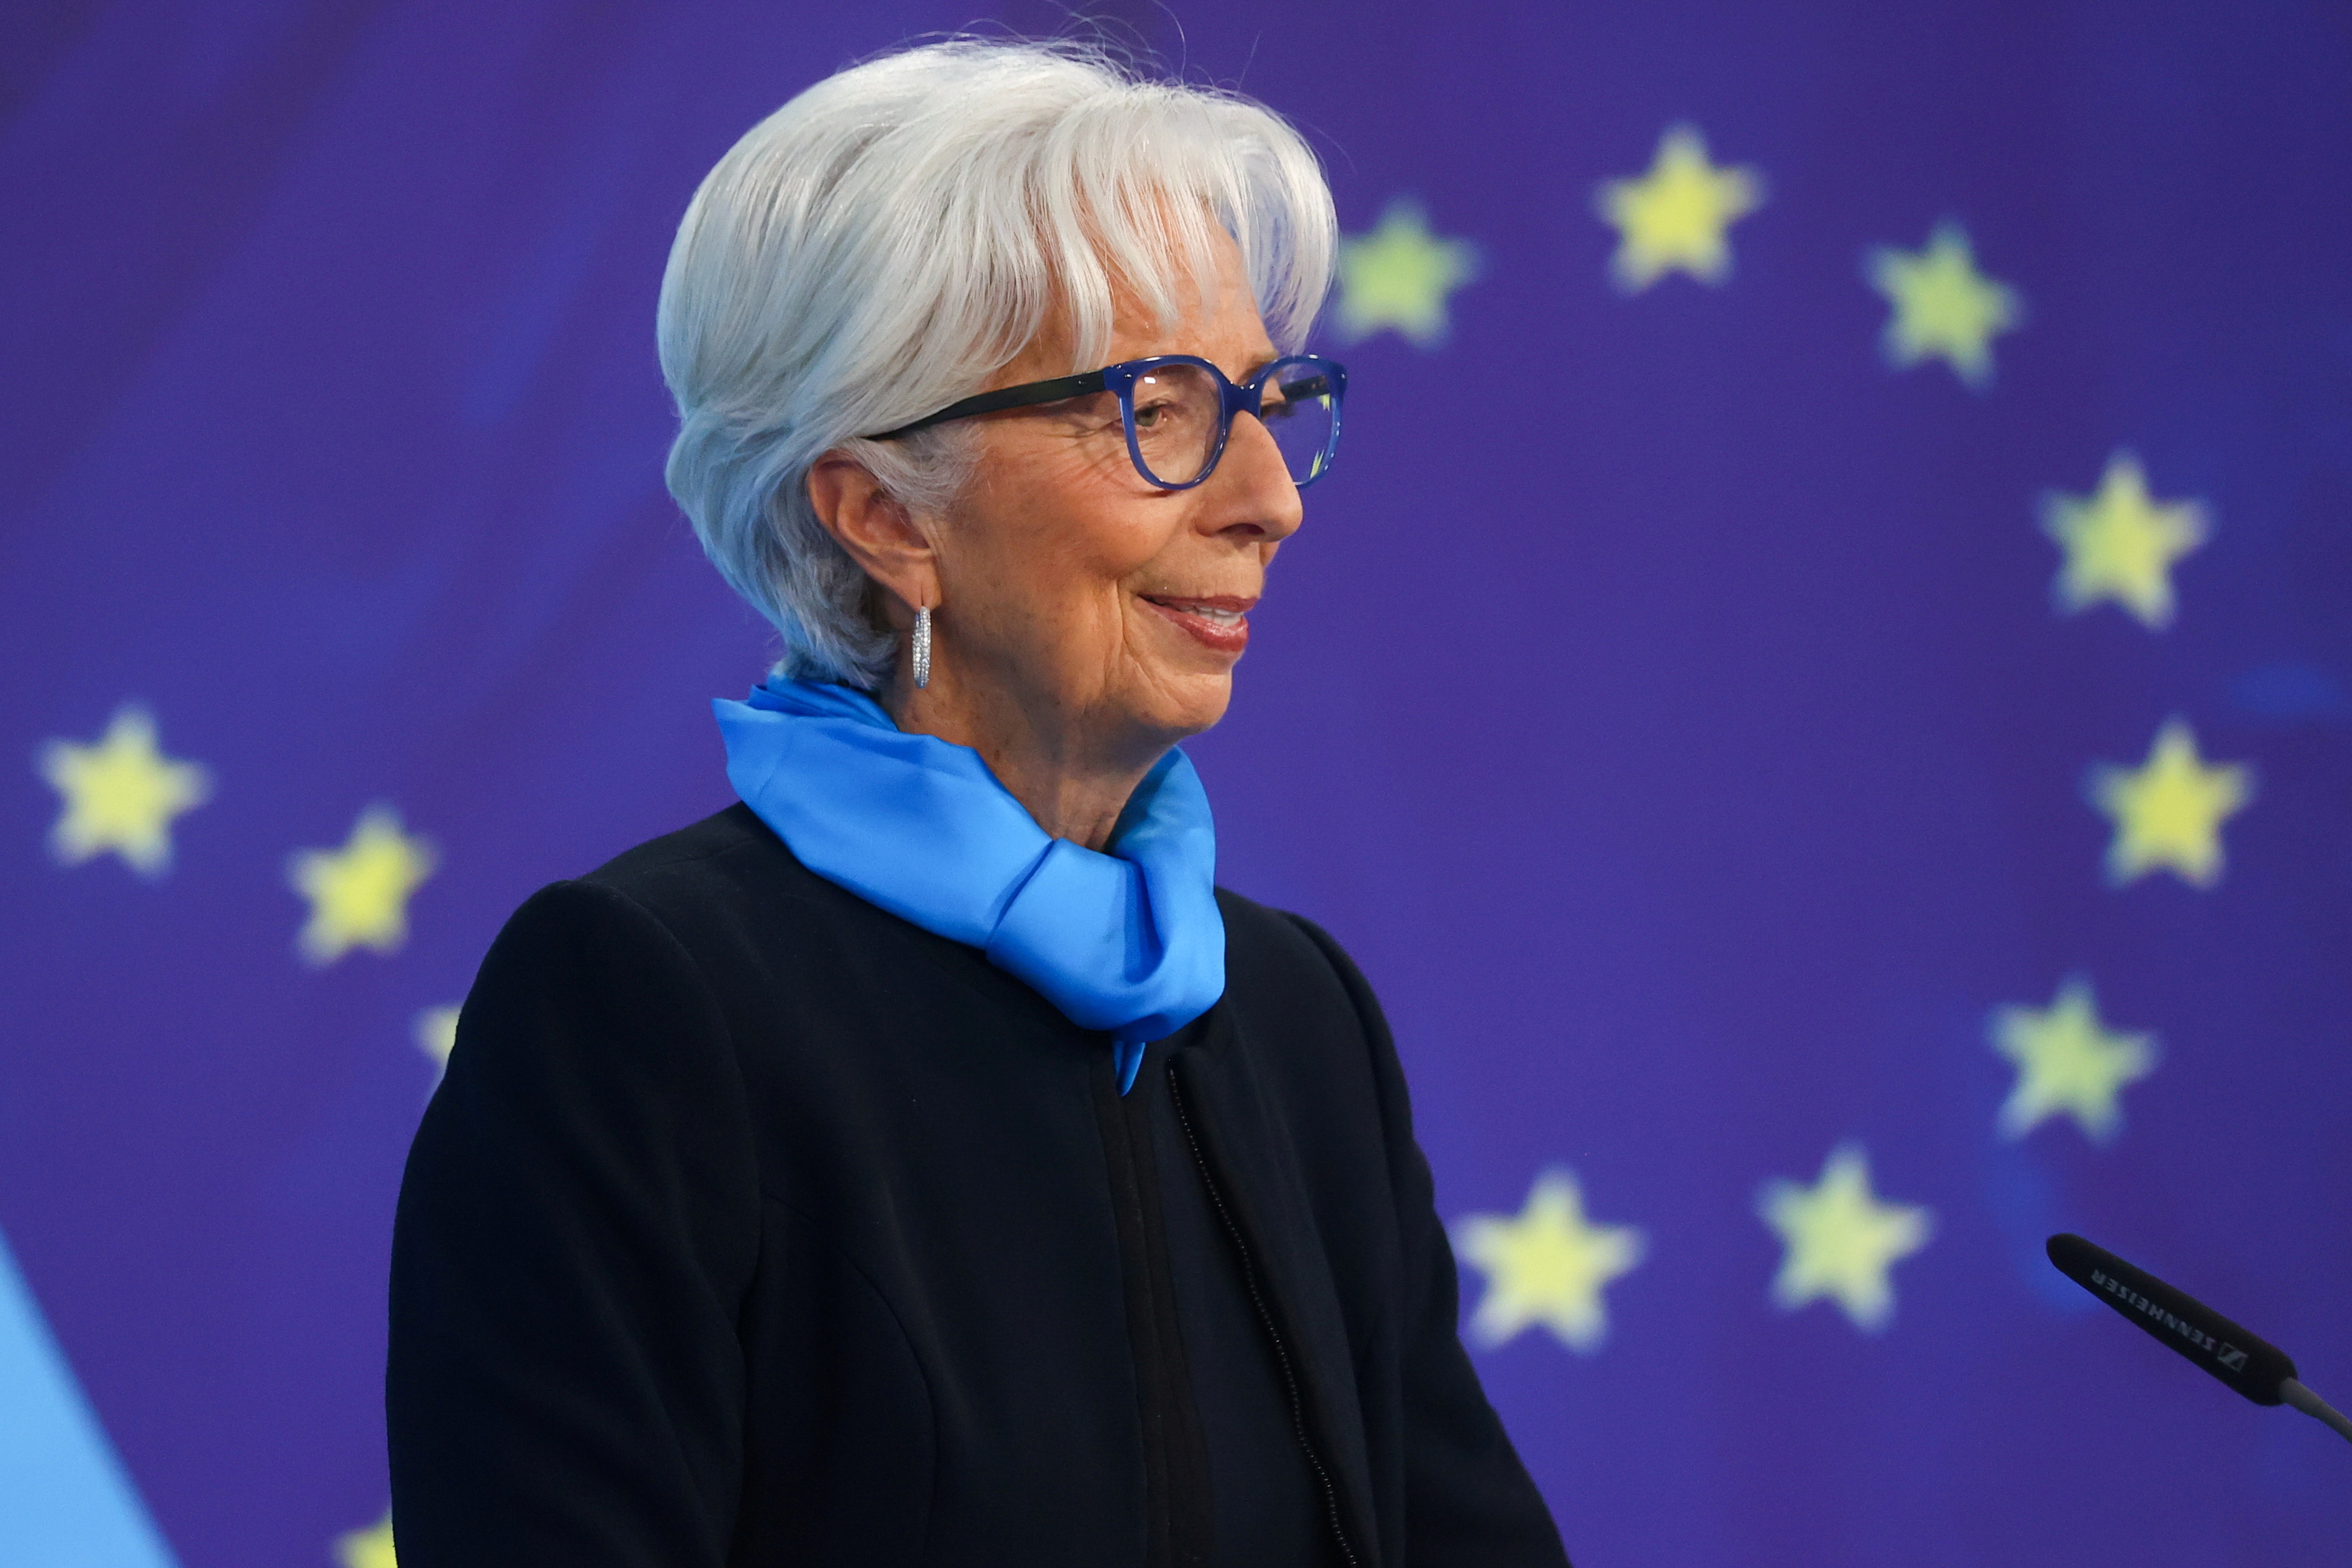 President of the European Central Bank (ECB) Christine Lagarde speaks as she takes part in a news conference on the outcome of the Governing Council meeting, in Frankfurt, Germany, October 28, 2021. REUTERS/Kai Pfaffenbach/File Photo